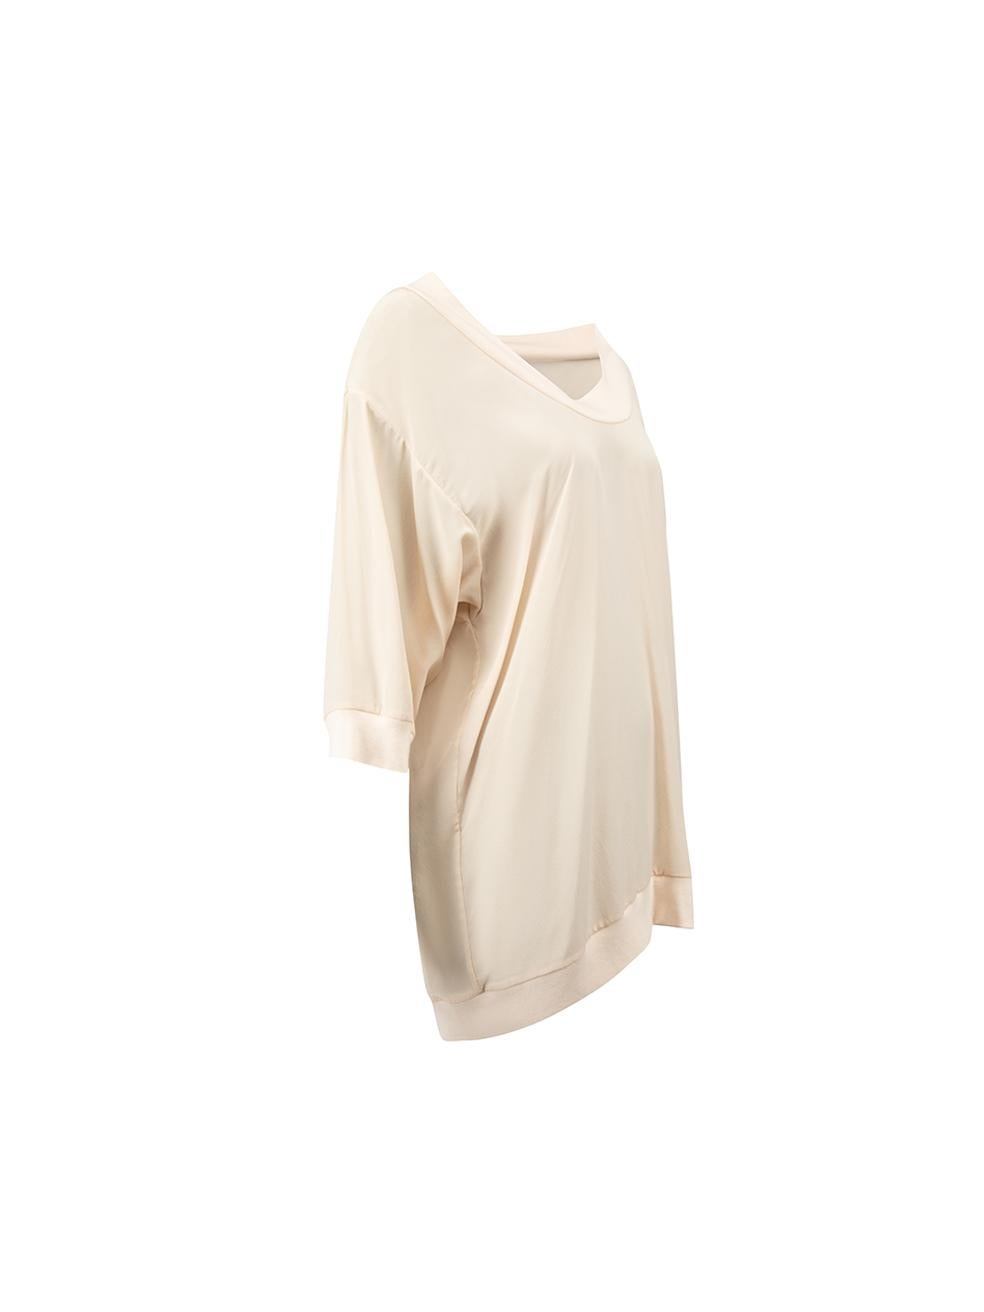 CONDITION is Good. Minor wear to top is evident. Light wear to the right-sleeve cuff with discoloured mark, the rear centre-back neck-edge lining has a faint mark on this used Stella McCartney designer resale item.

Details
Pink
Silk
Oversized